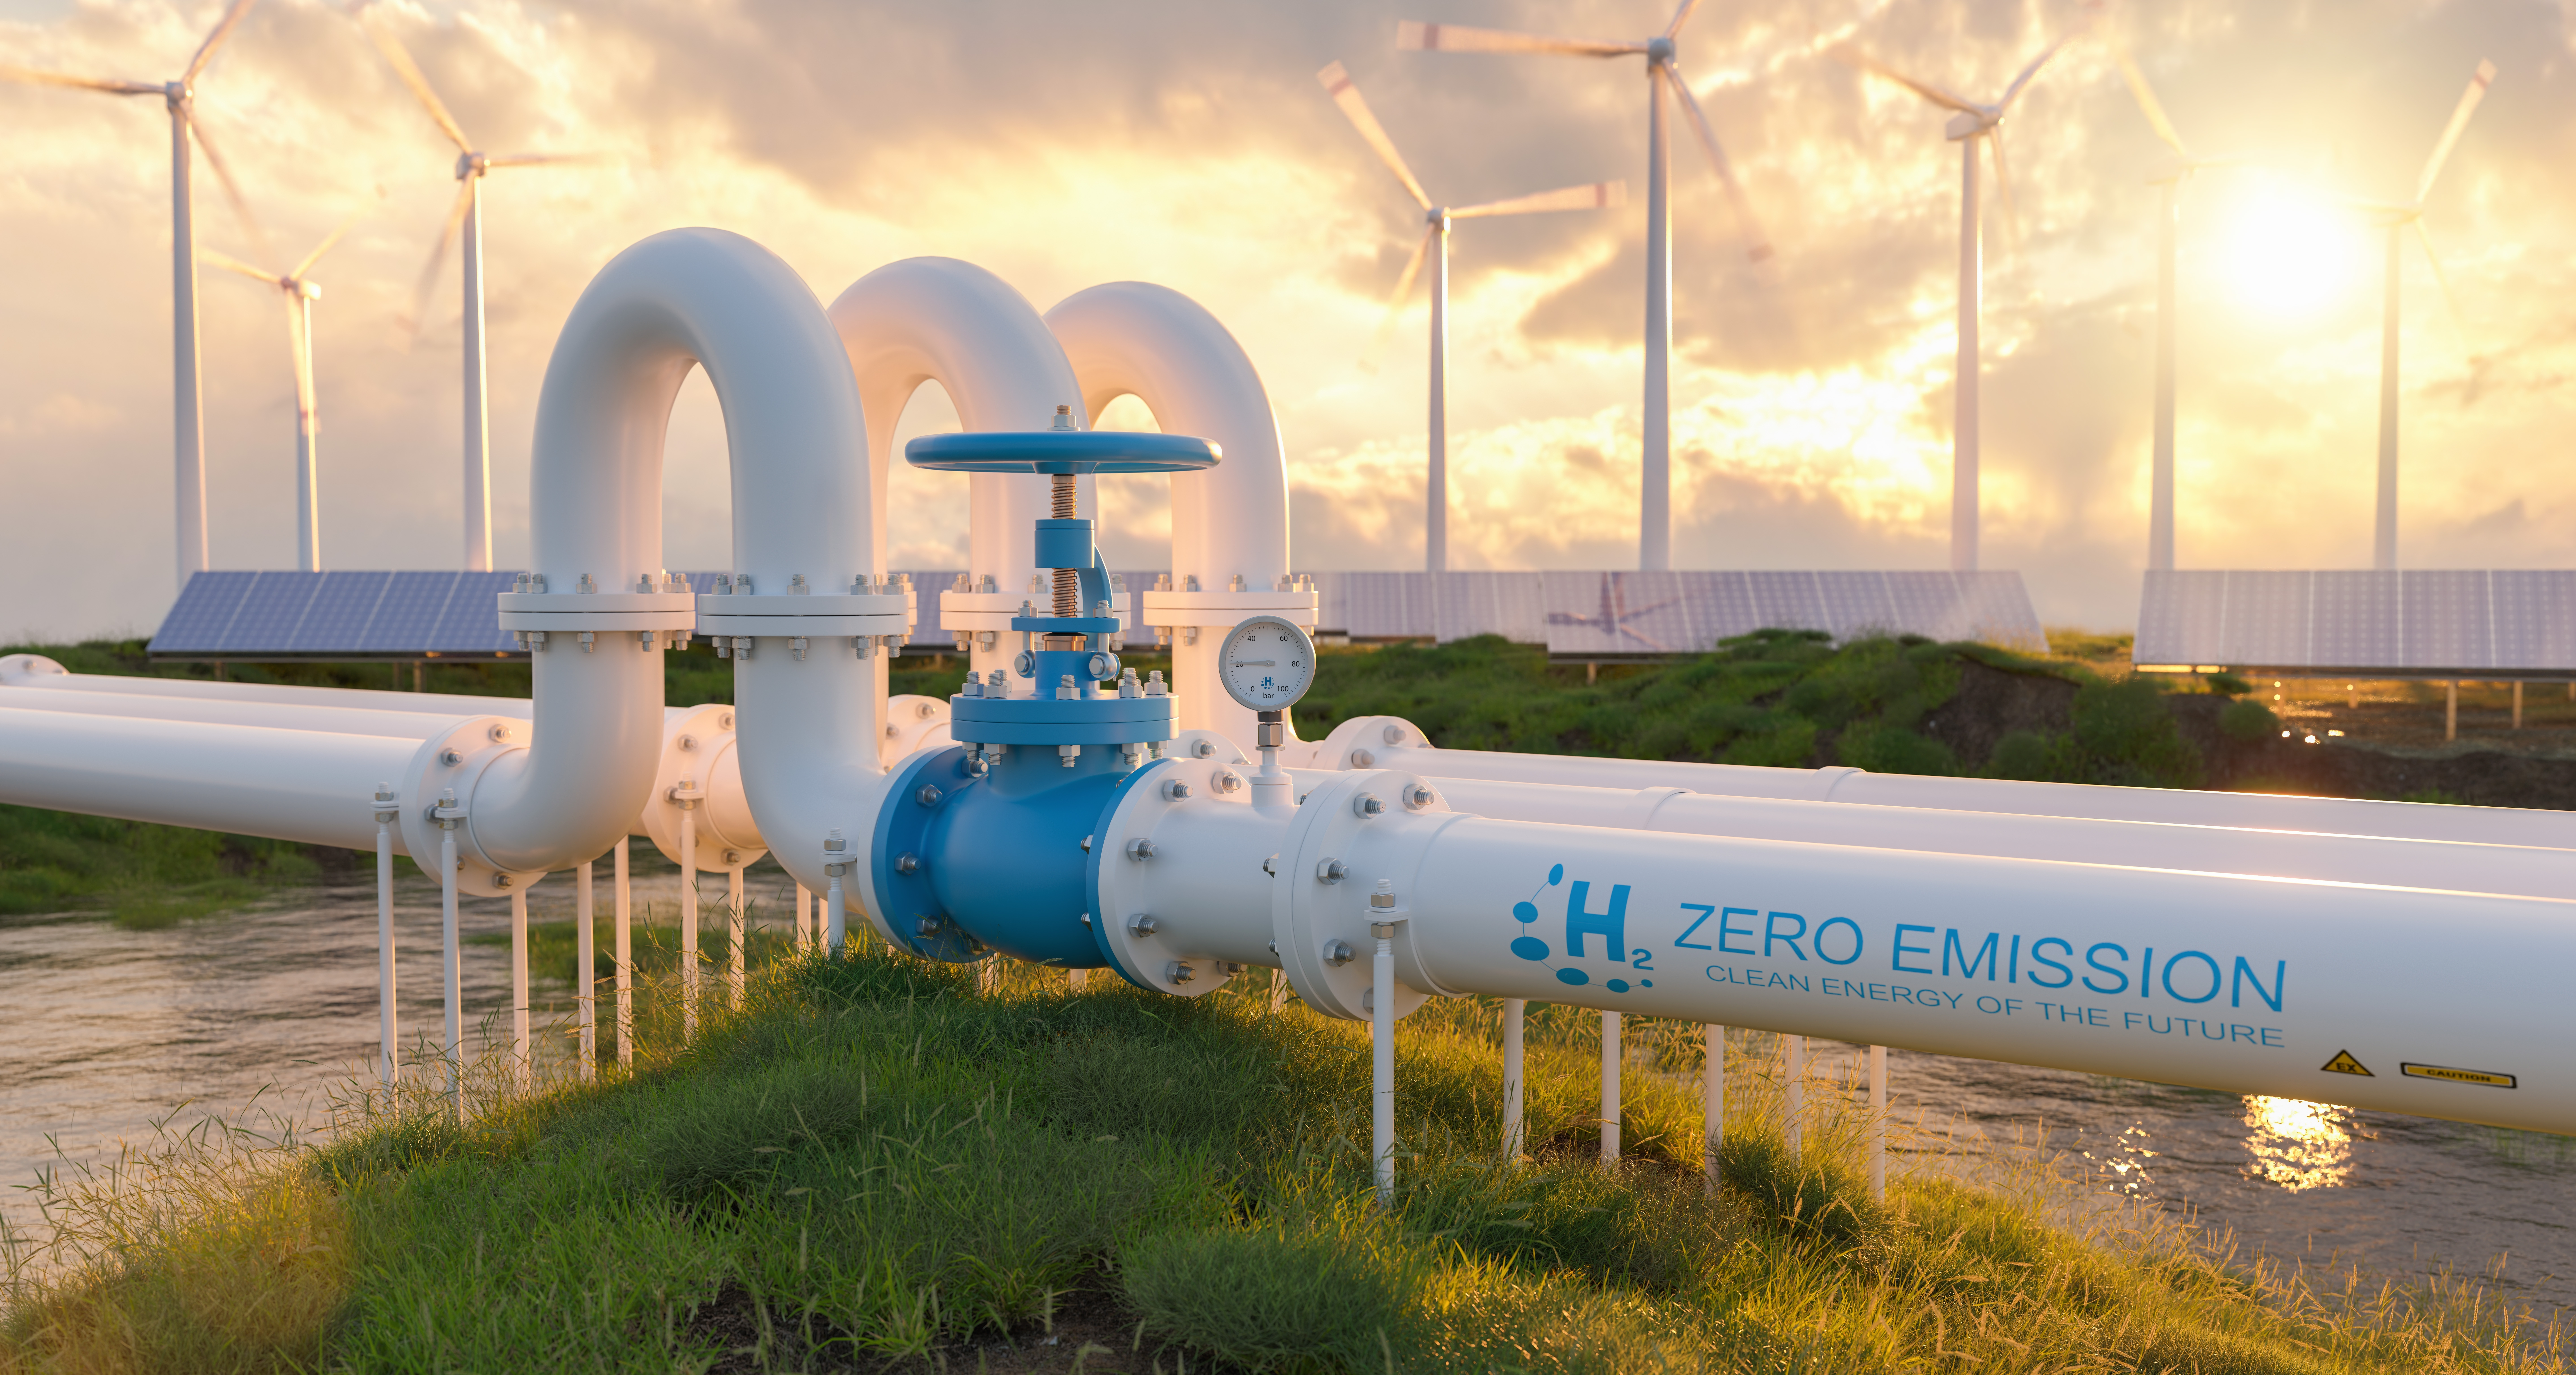 A pipe that reads "H2 Zero emission" with wind turbines in the background.